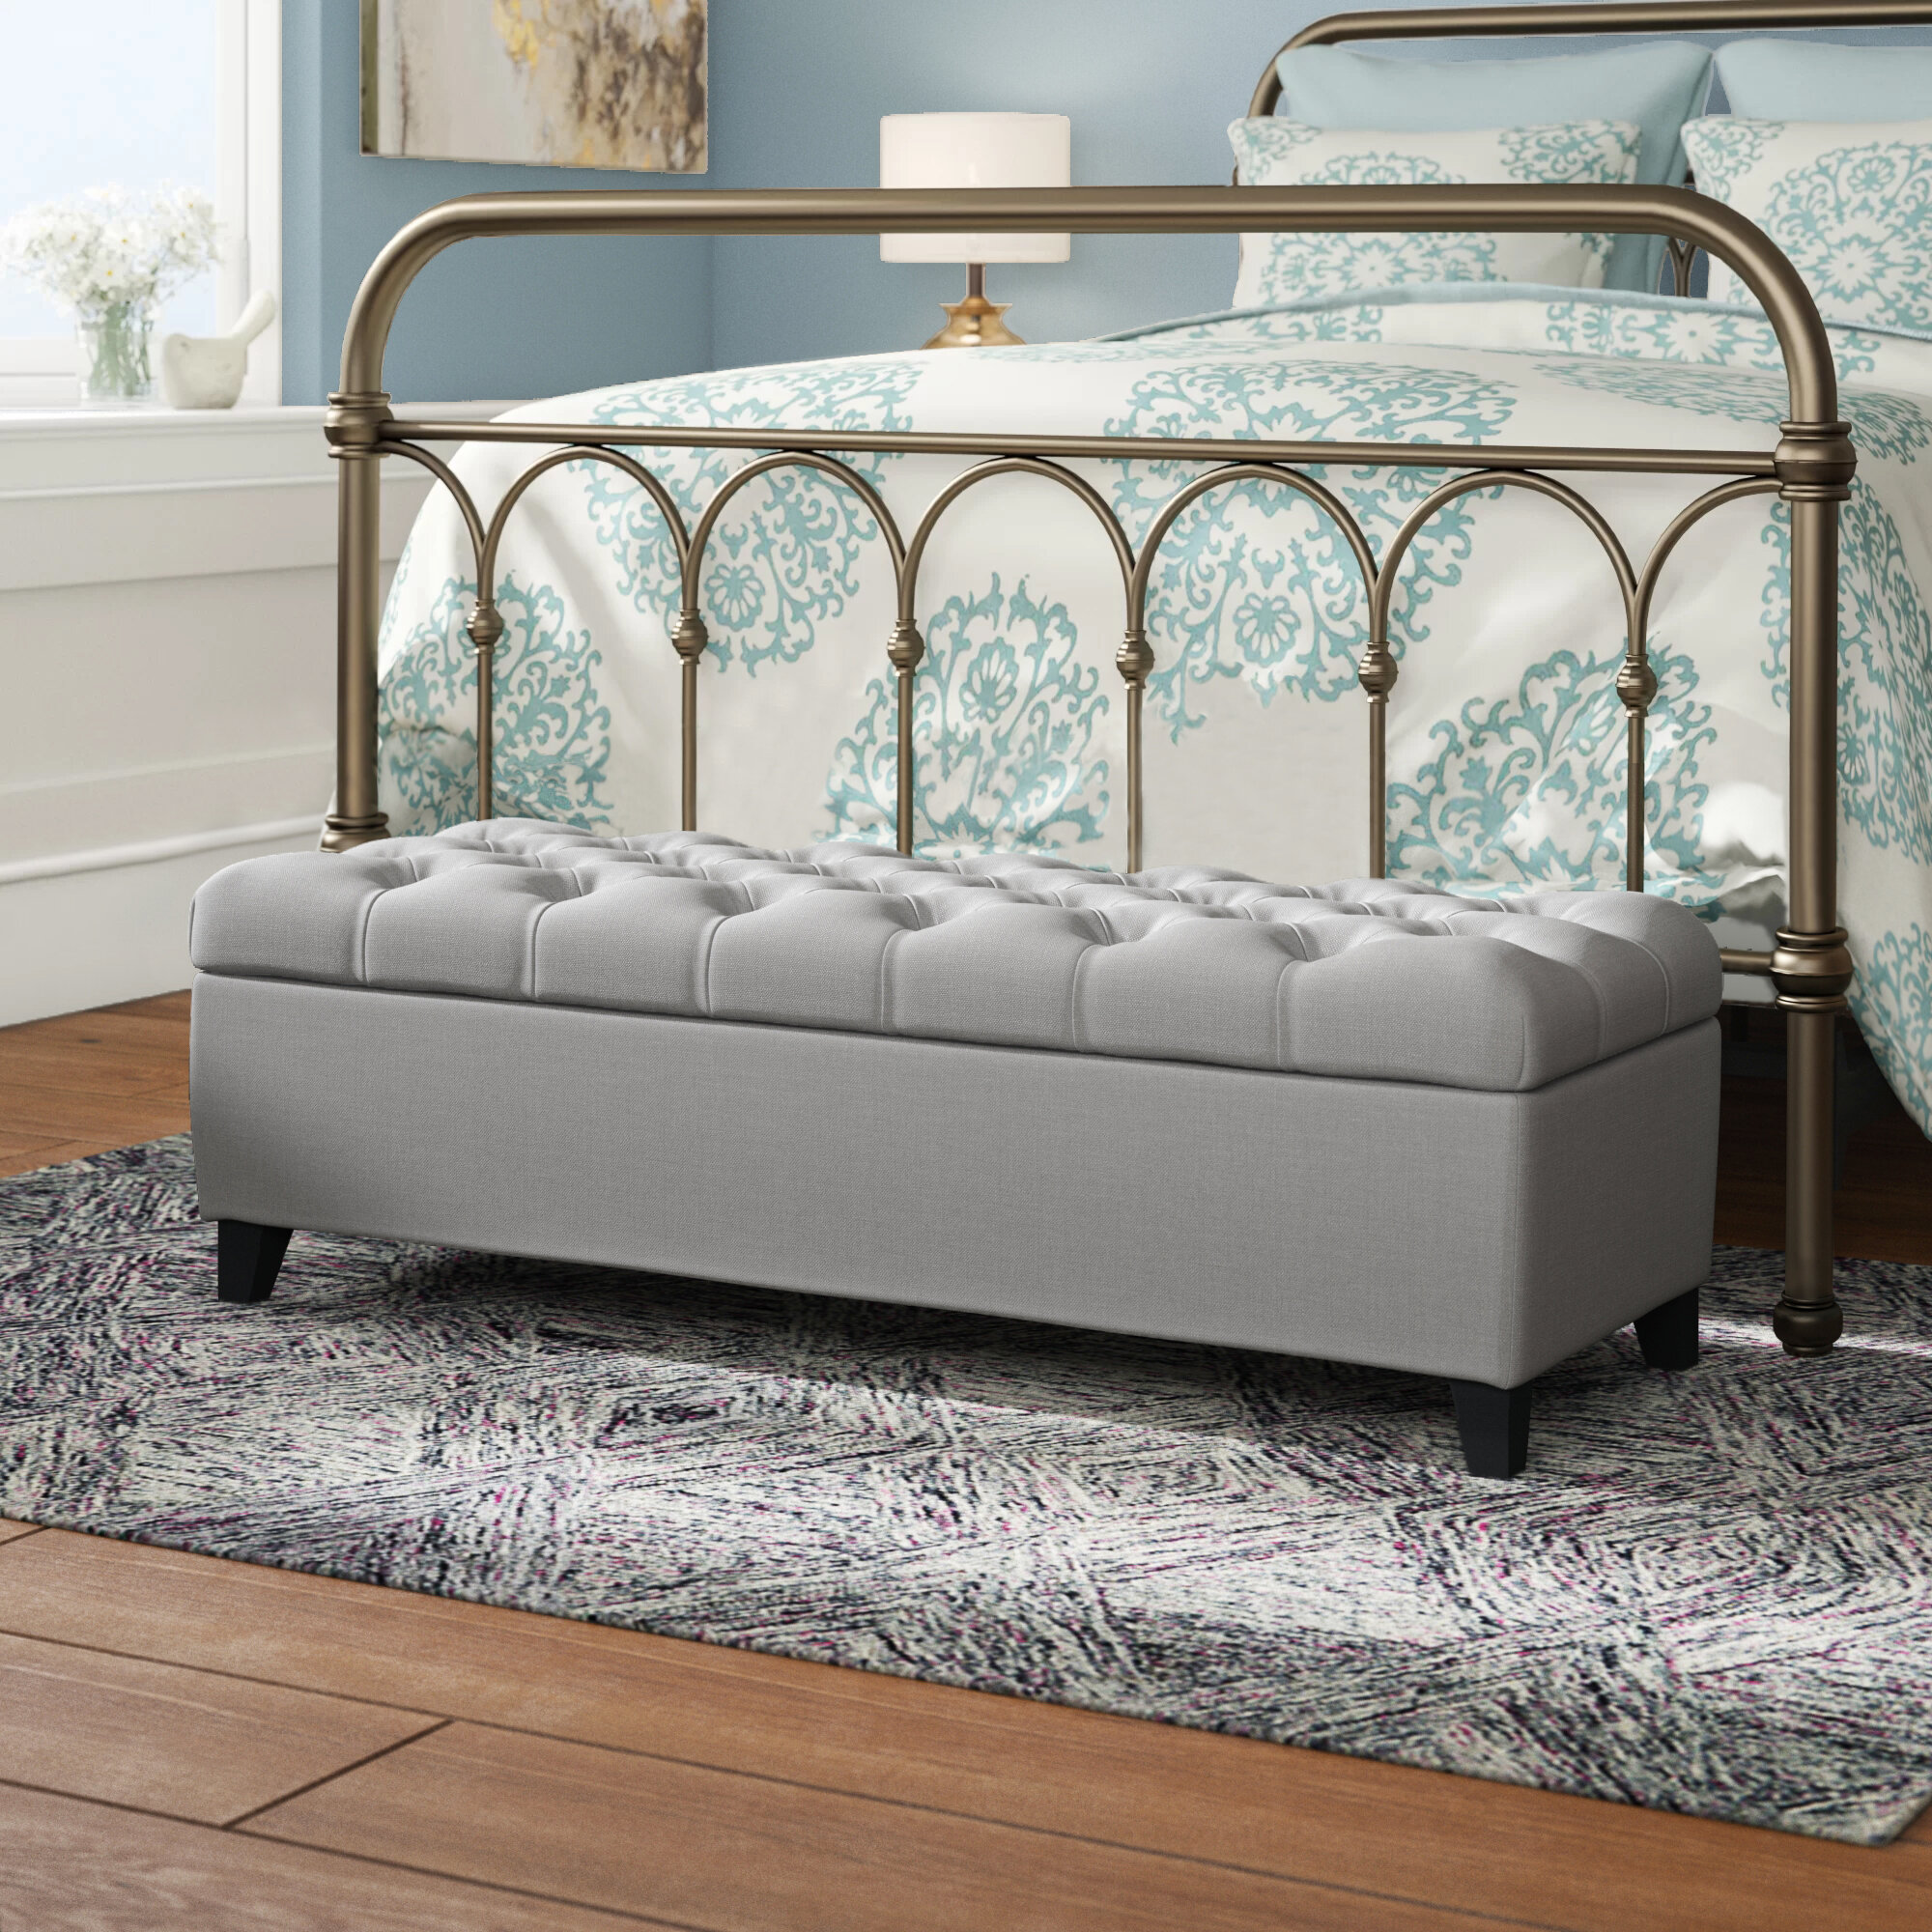 Featured image of post End Of Bed Bench Next - Unlike most bed benches, this west elm celine bench has the added comfort of a low profile back and arms.